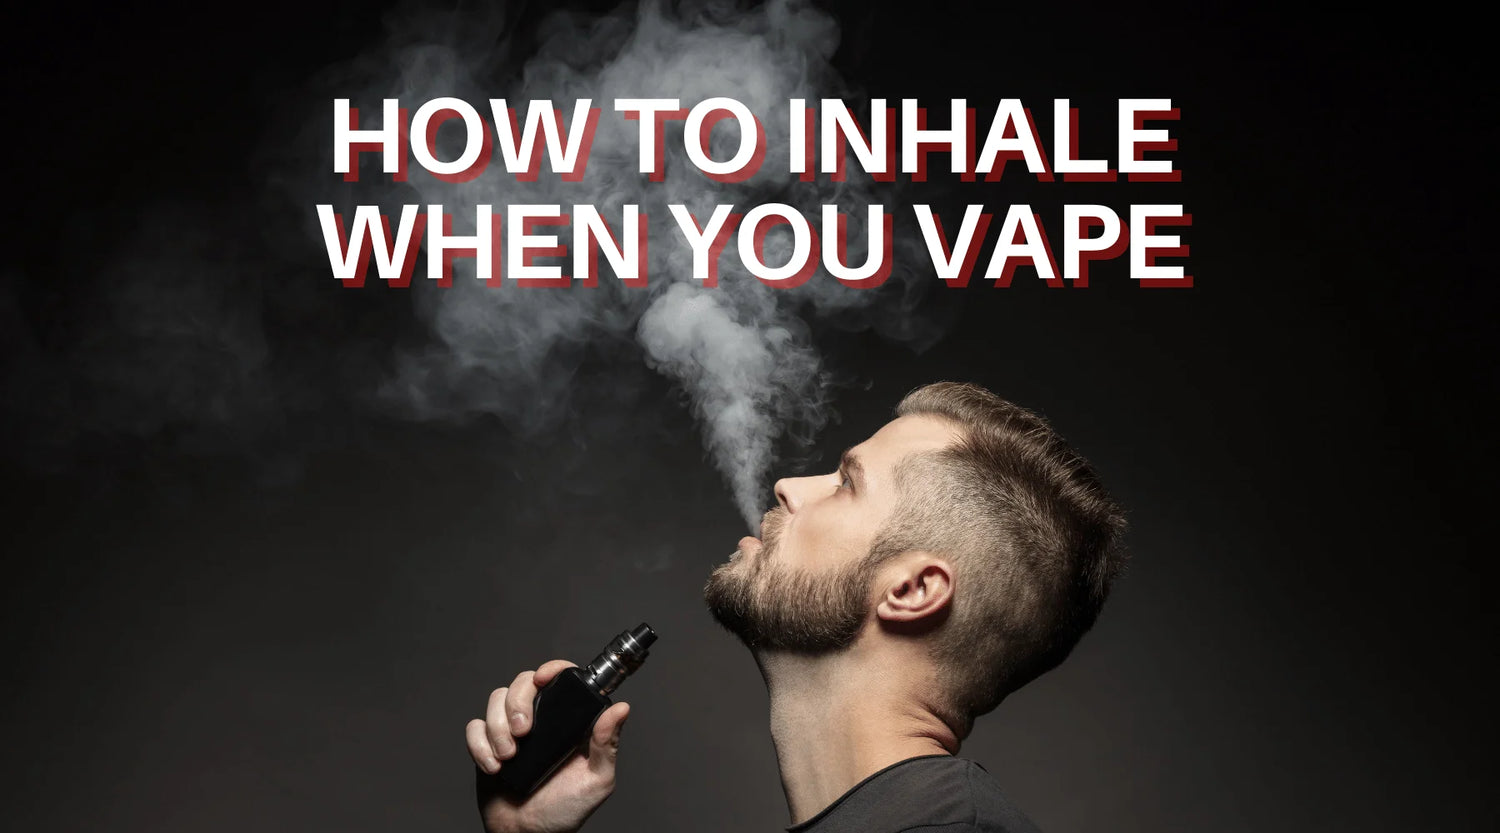 How To Inhale When You Vape